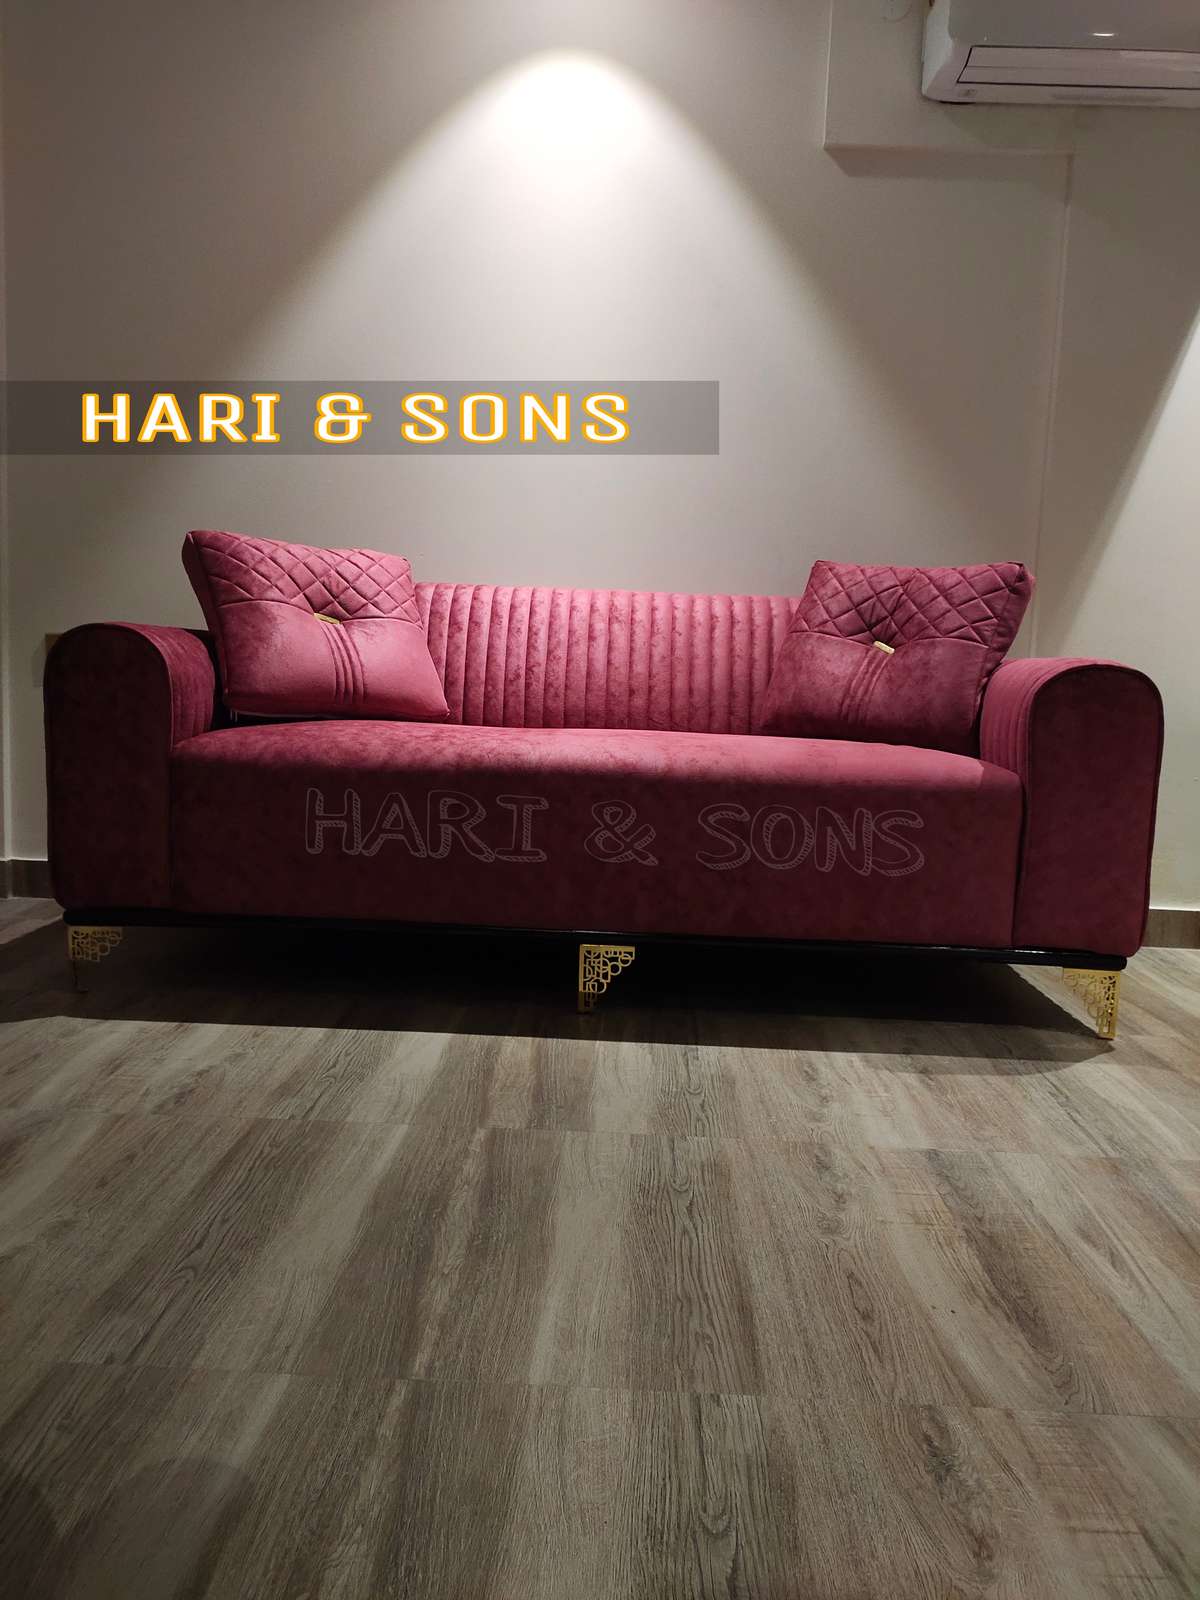 HARI & SONS  LUXURY FURNITURE INTERIOR DESIGNER

 https://www.facebook.com/109649953872237 

[9/6/5/0/9/8/0/9/0/6] [7/9/8/2/5/5/2/2/5/8]

THIS IS ADVERTISING PRICE NOT REAL PRICE. 

WE ARE CUSTOMIZE ROOM INTERIOR AND FURNITURE ONLY CUSTOMER REQUIREMENTS(according to client pocket) 

#luxurysofa #sofaset #HIGH_BACK_CHAIR #NEW_PATTERN #NEW_SOFA #LUXURY_SOFA #LUXURY_BED #DINING_TABLE #WALL_PANELLING #WALL_PAPER #LUXURY_INTERIOR